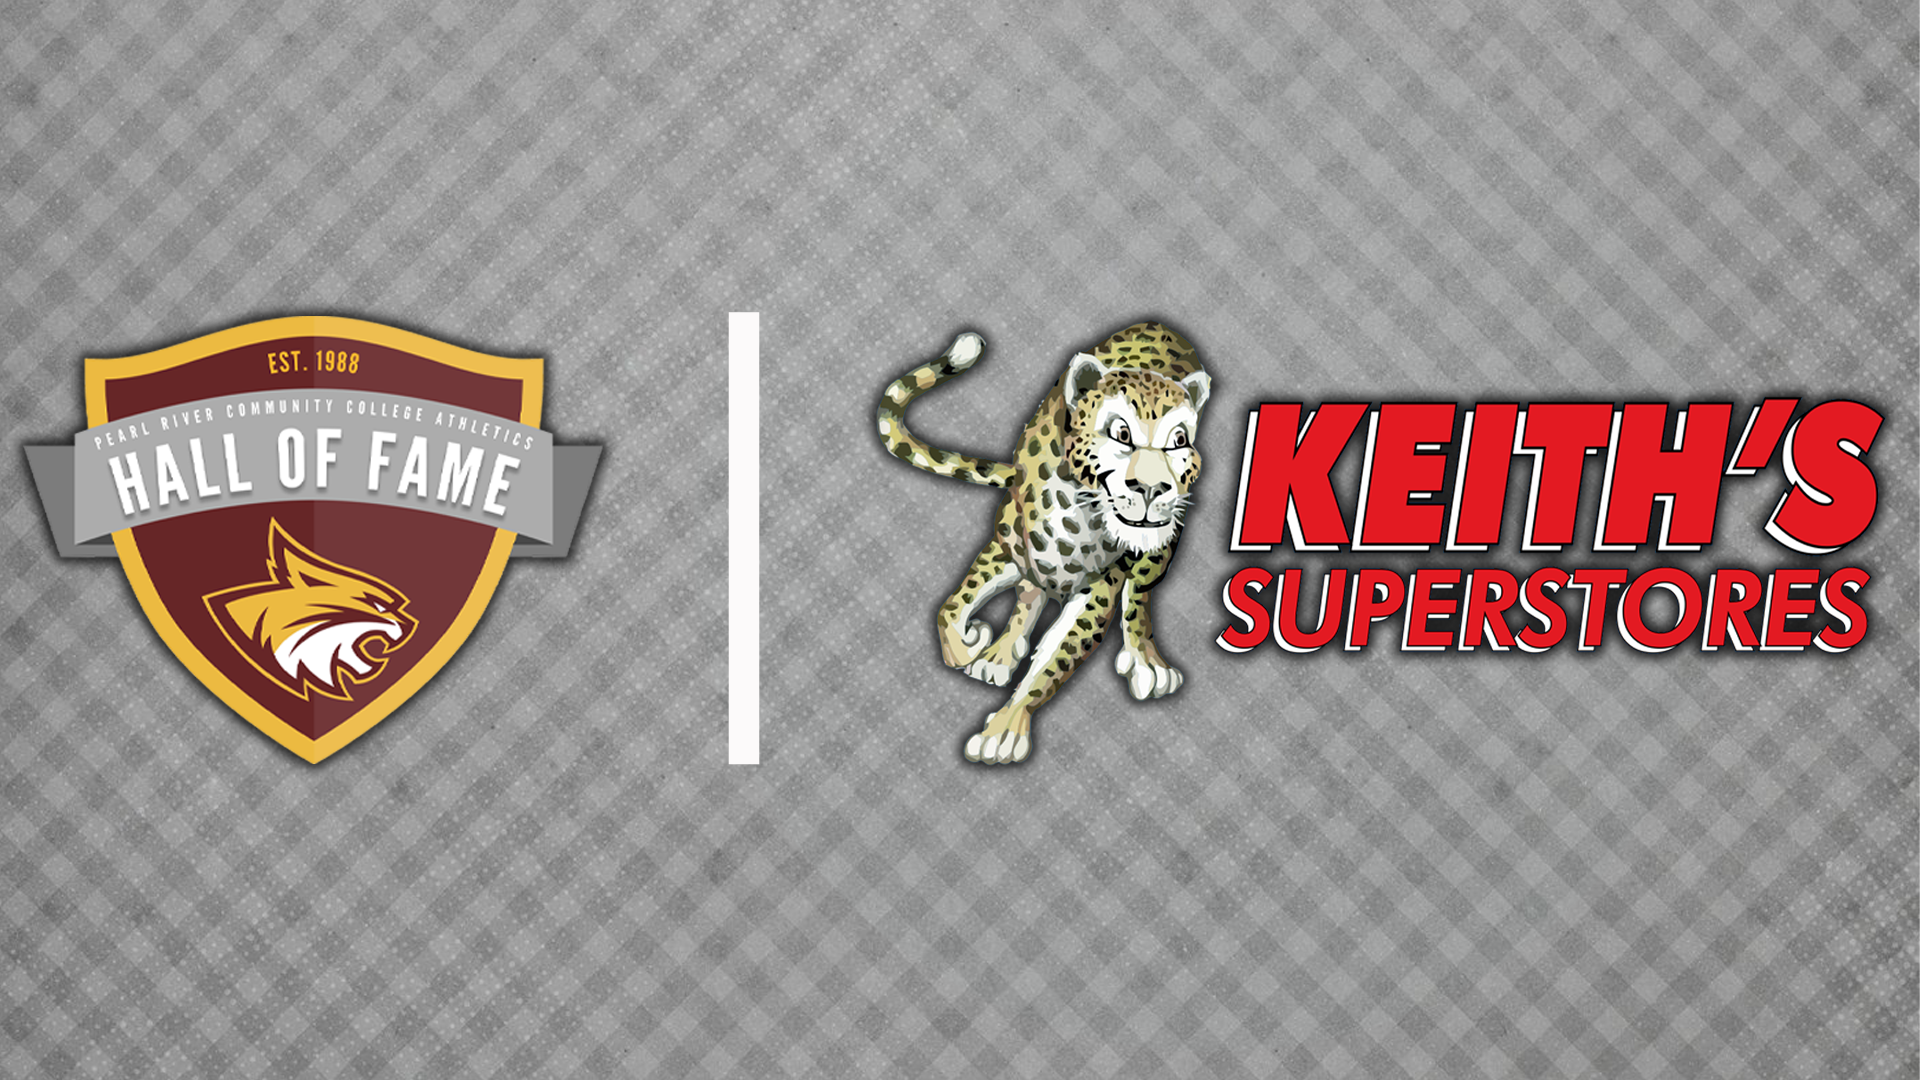 Pearl River partners with Keith's Superstores for Hall of Fame